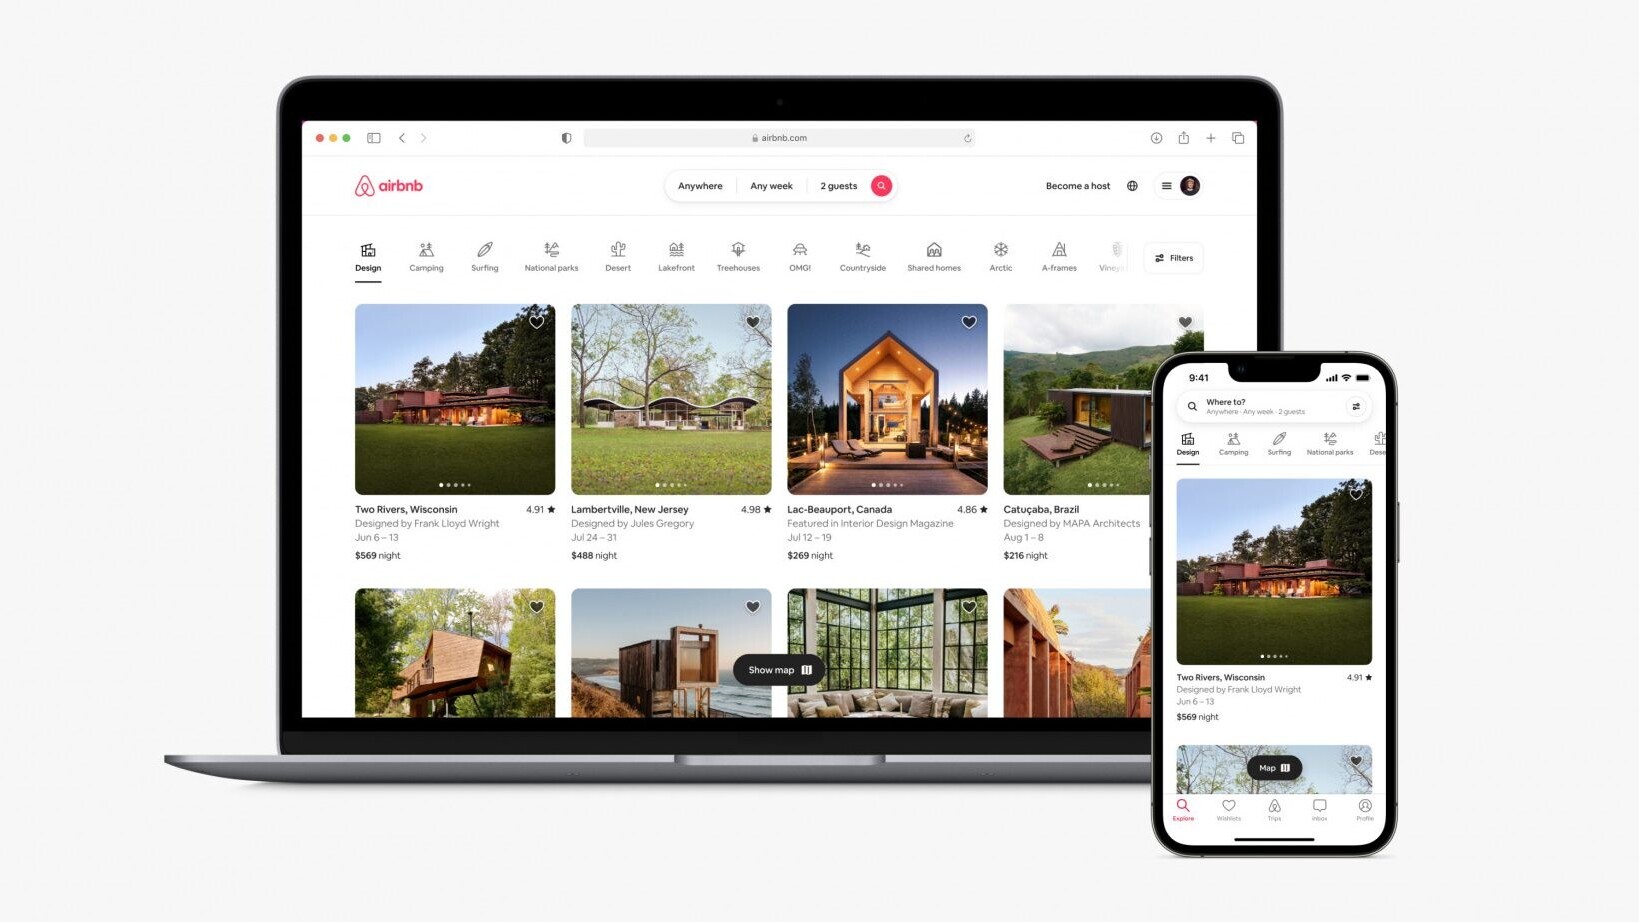 Airbnb is rolling out a new design to encourage travel discovery